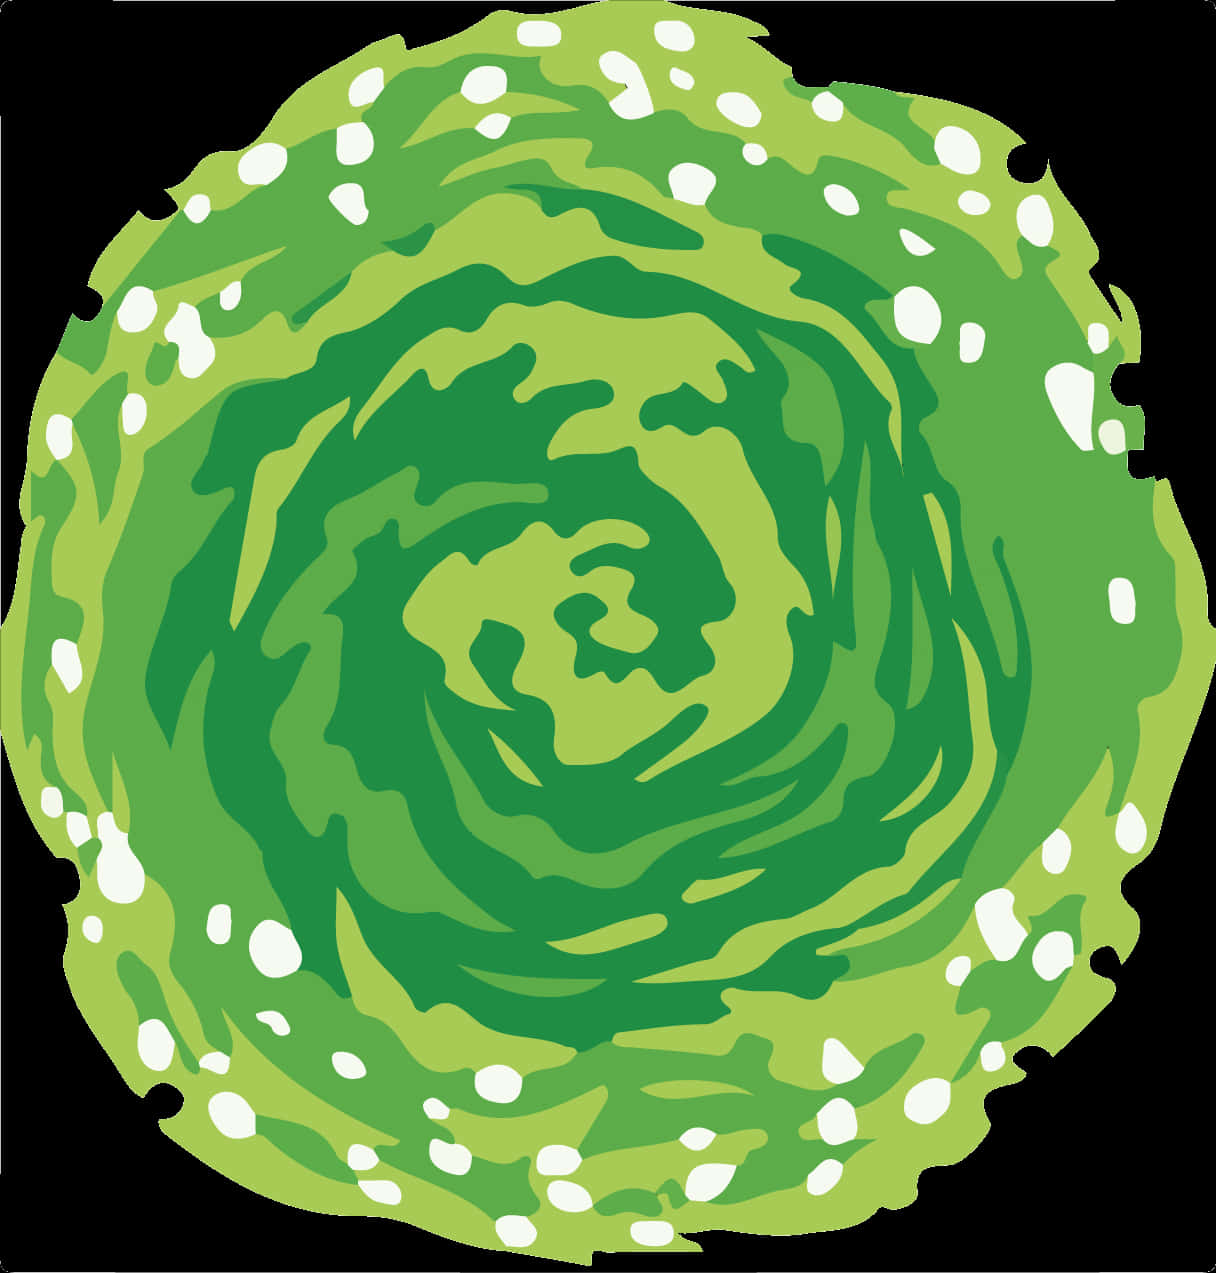 A Green Swirly Circle With White Dots